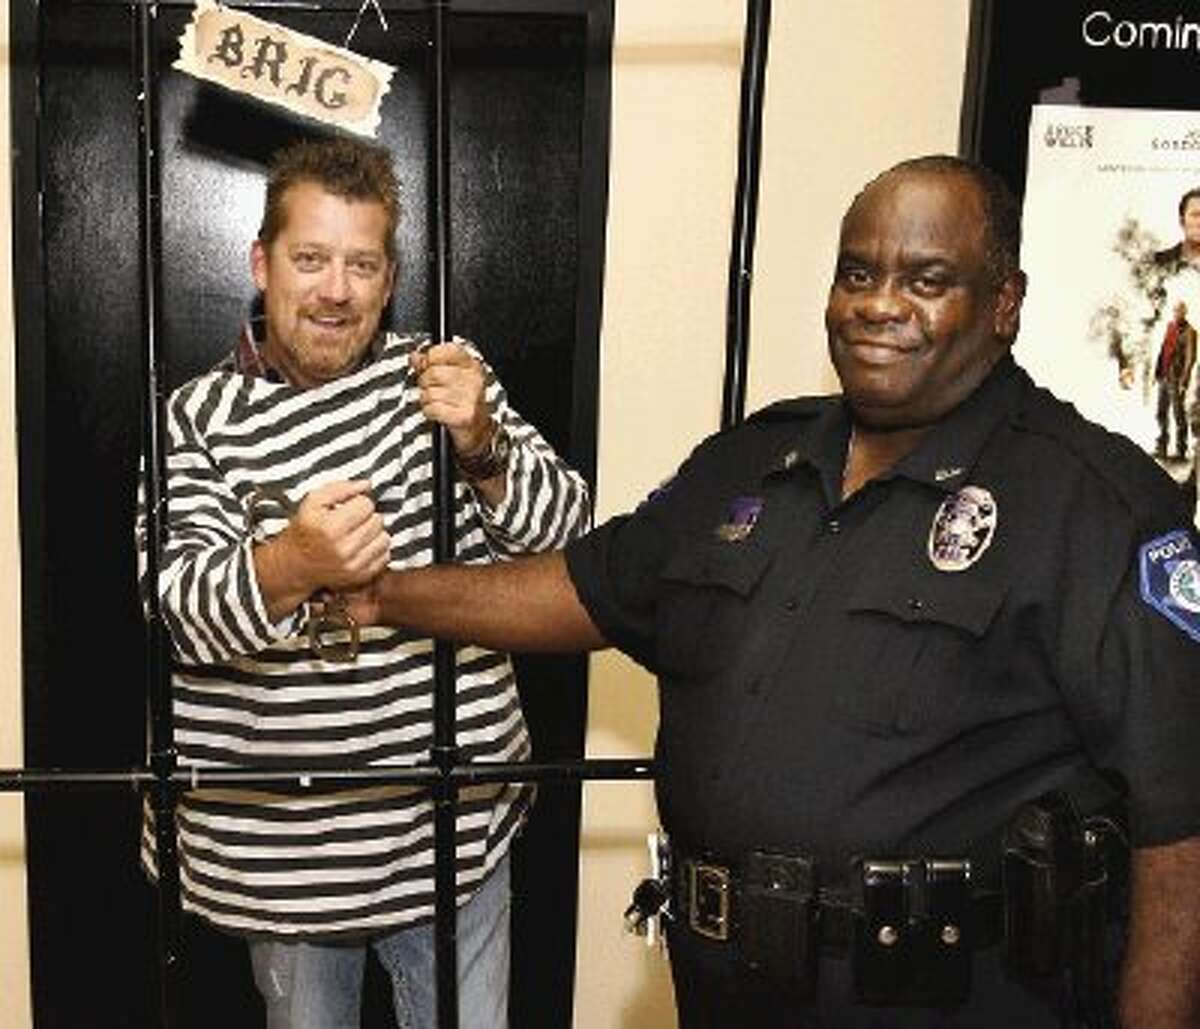 The top fundraiser in the annual MDA Lock-Up fundraising event was Scott Cunningham of GTT Inc. in Conroe. He was locked up by Roosevelt Lasker, community liason with the Conroe Police Department.